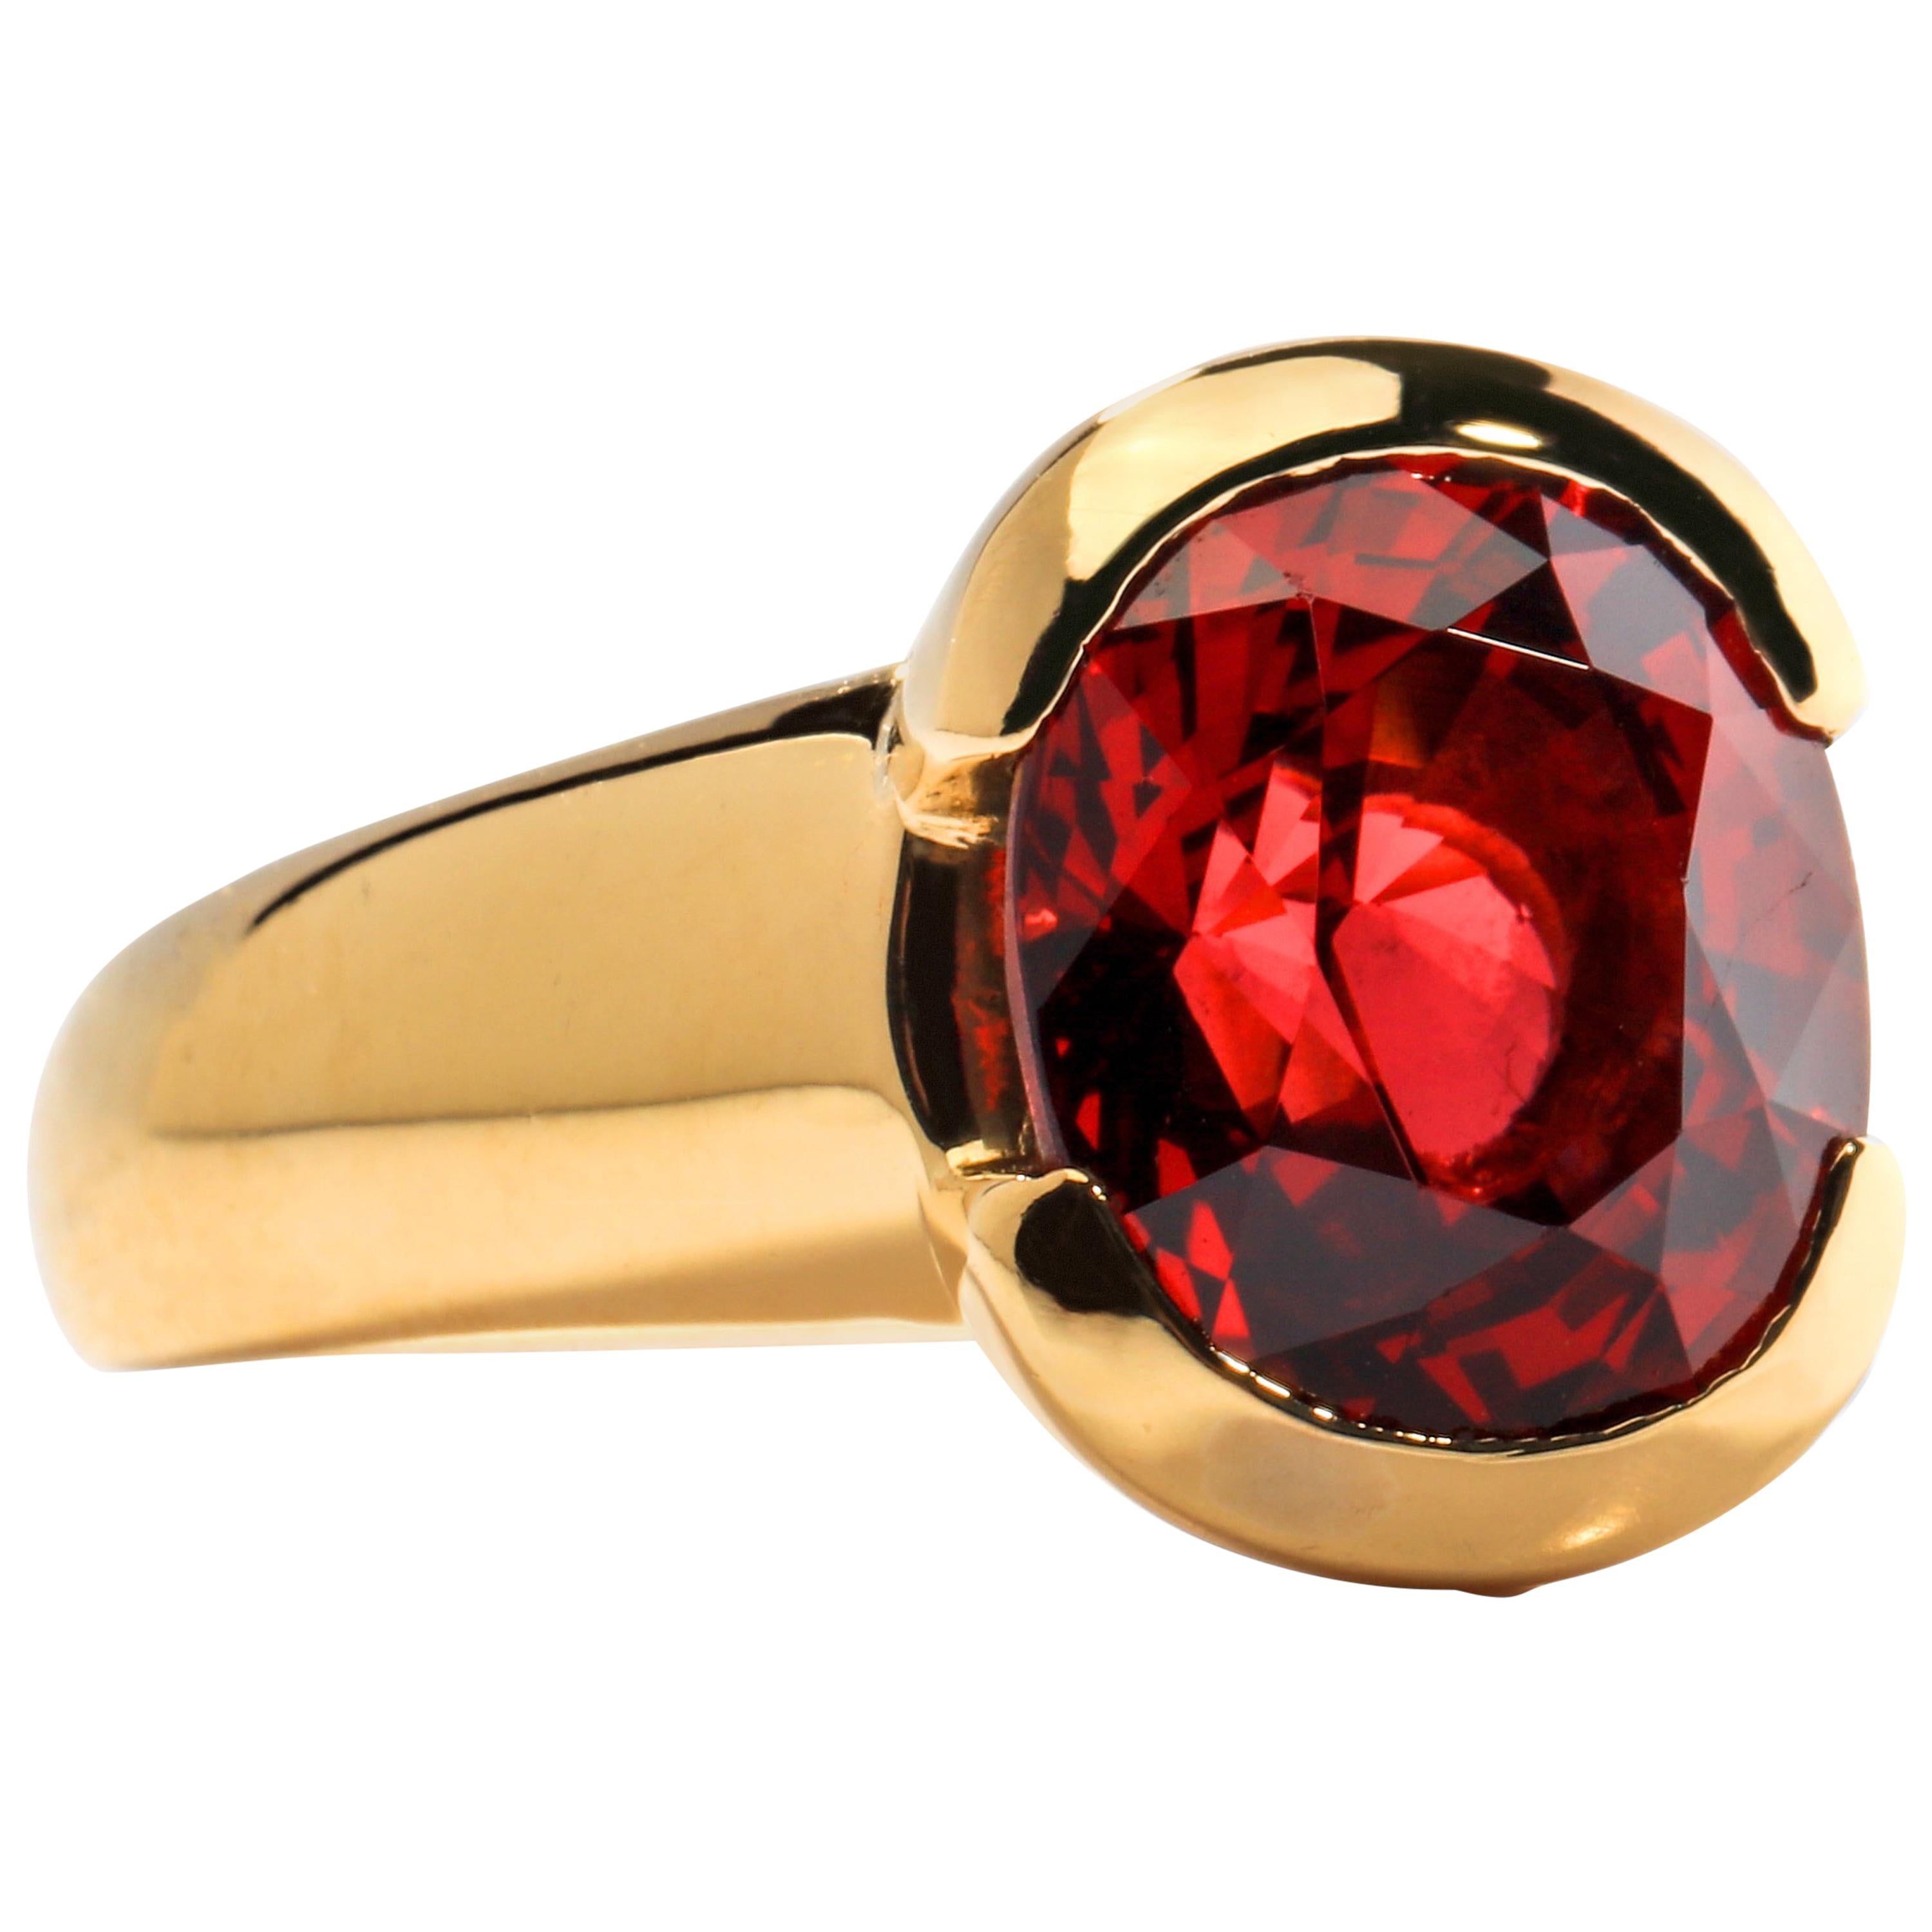 4 Carat Ruby-Red Spinel Ring Certified Untreated